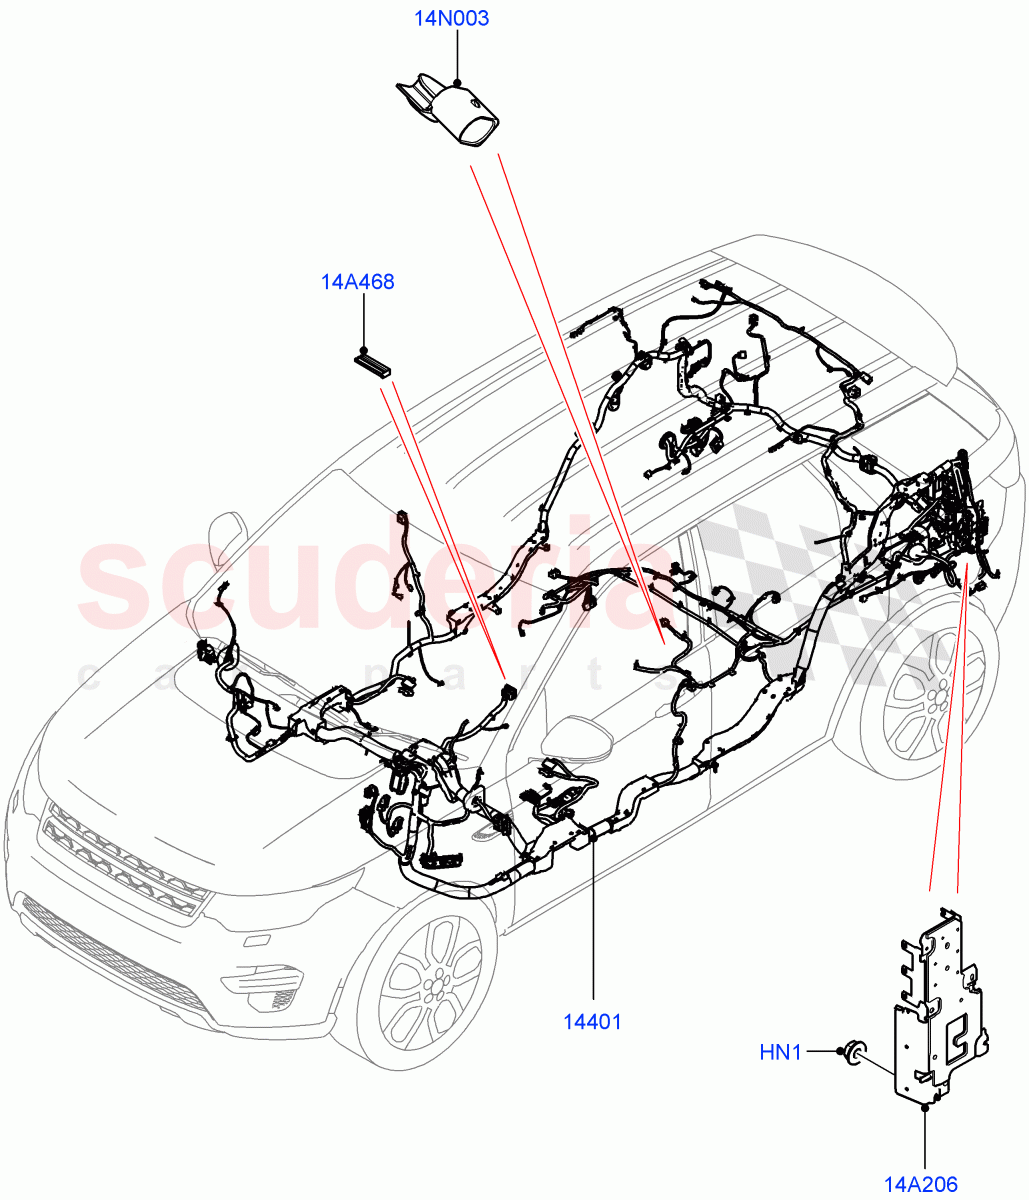 Electrical Wiring - Engine And Dash(Main Harness)(Halewood (UK))((V)TOKH999999) of Land Rover Land Rover Discovery Sport (2015+) [2.0 Turbo Petrol GTDI]